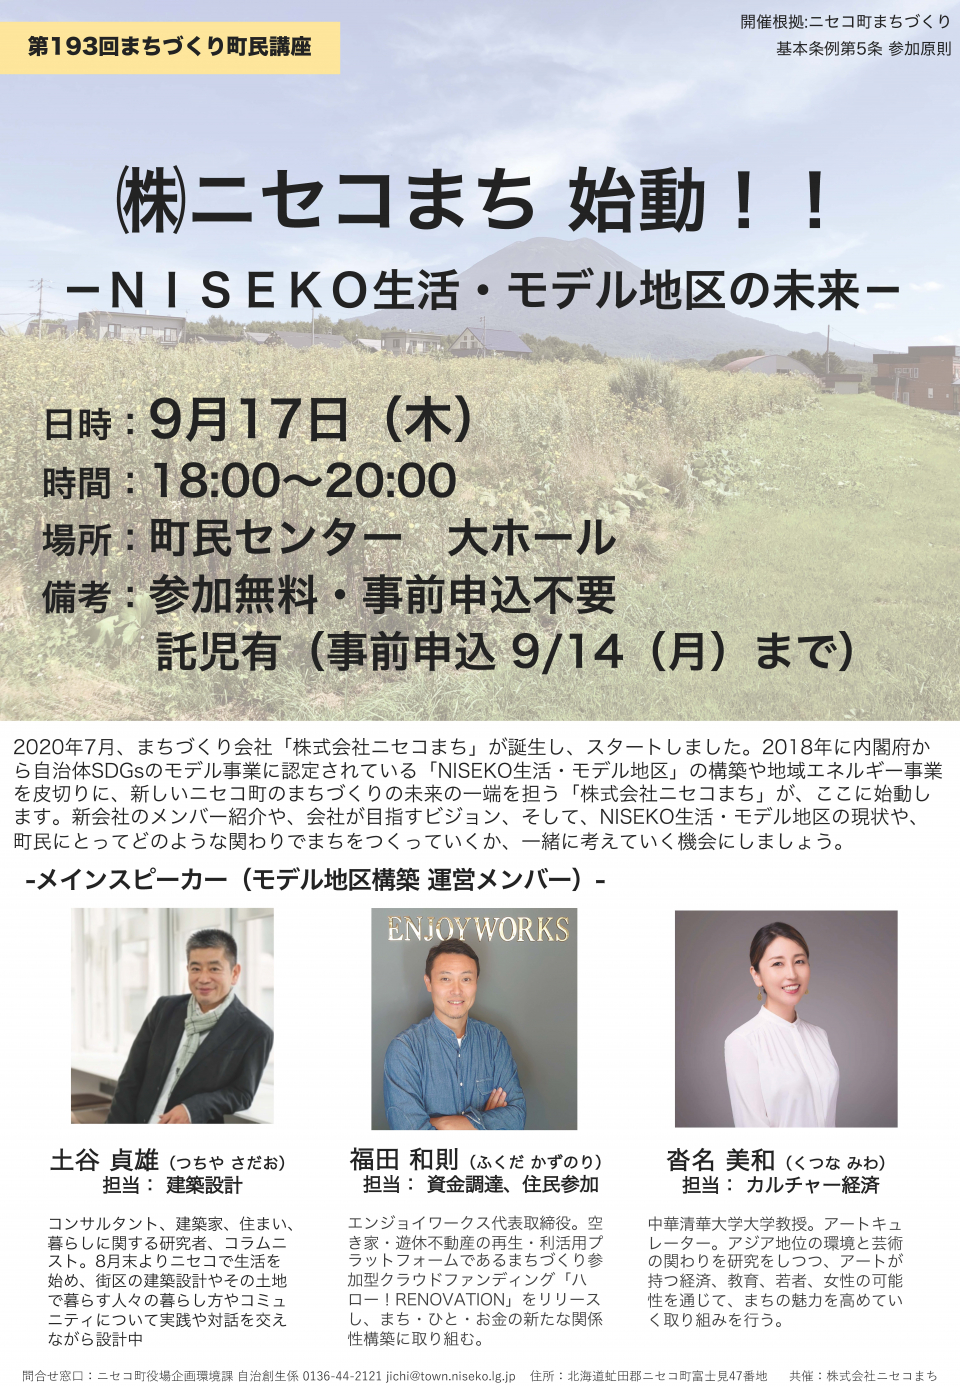 The 193rd Town Development Townspeople Course: Niseko Town Co., Ltd. started!